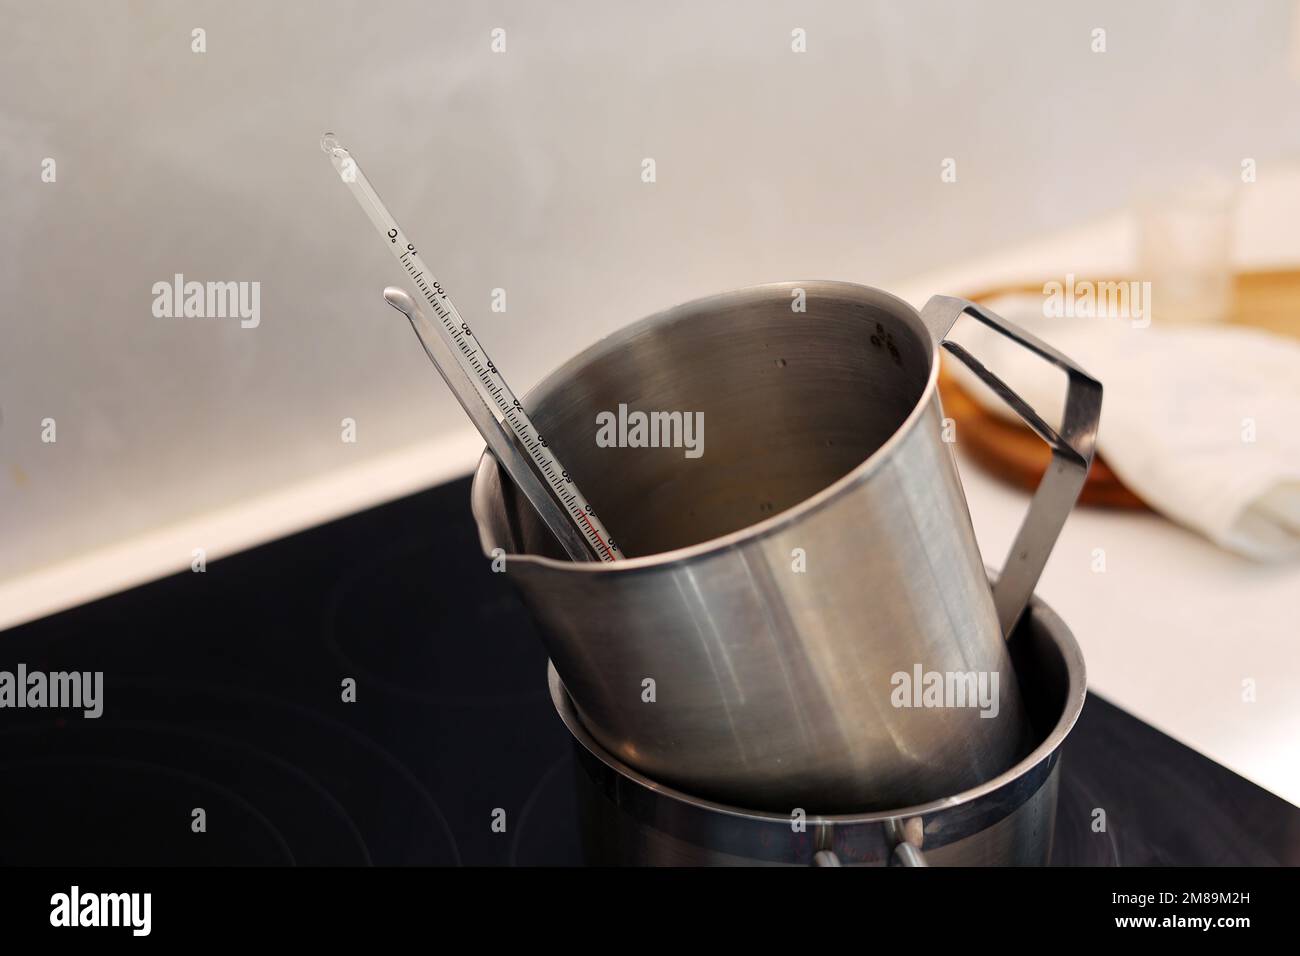 Heat measuring jug of water and jojoba oil in boiling water, record the temperature with a thermometer Stock Photo